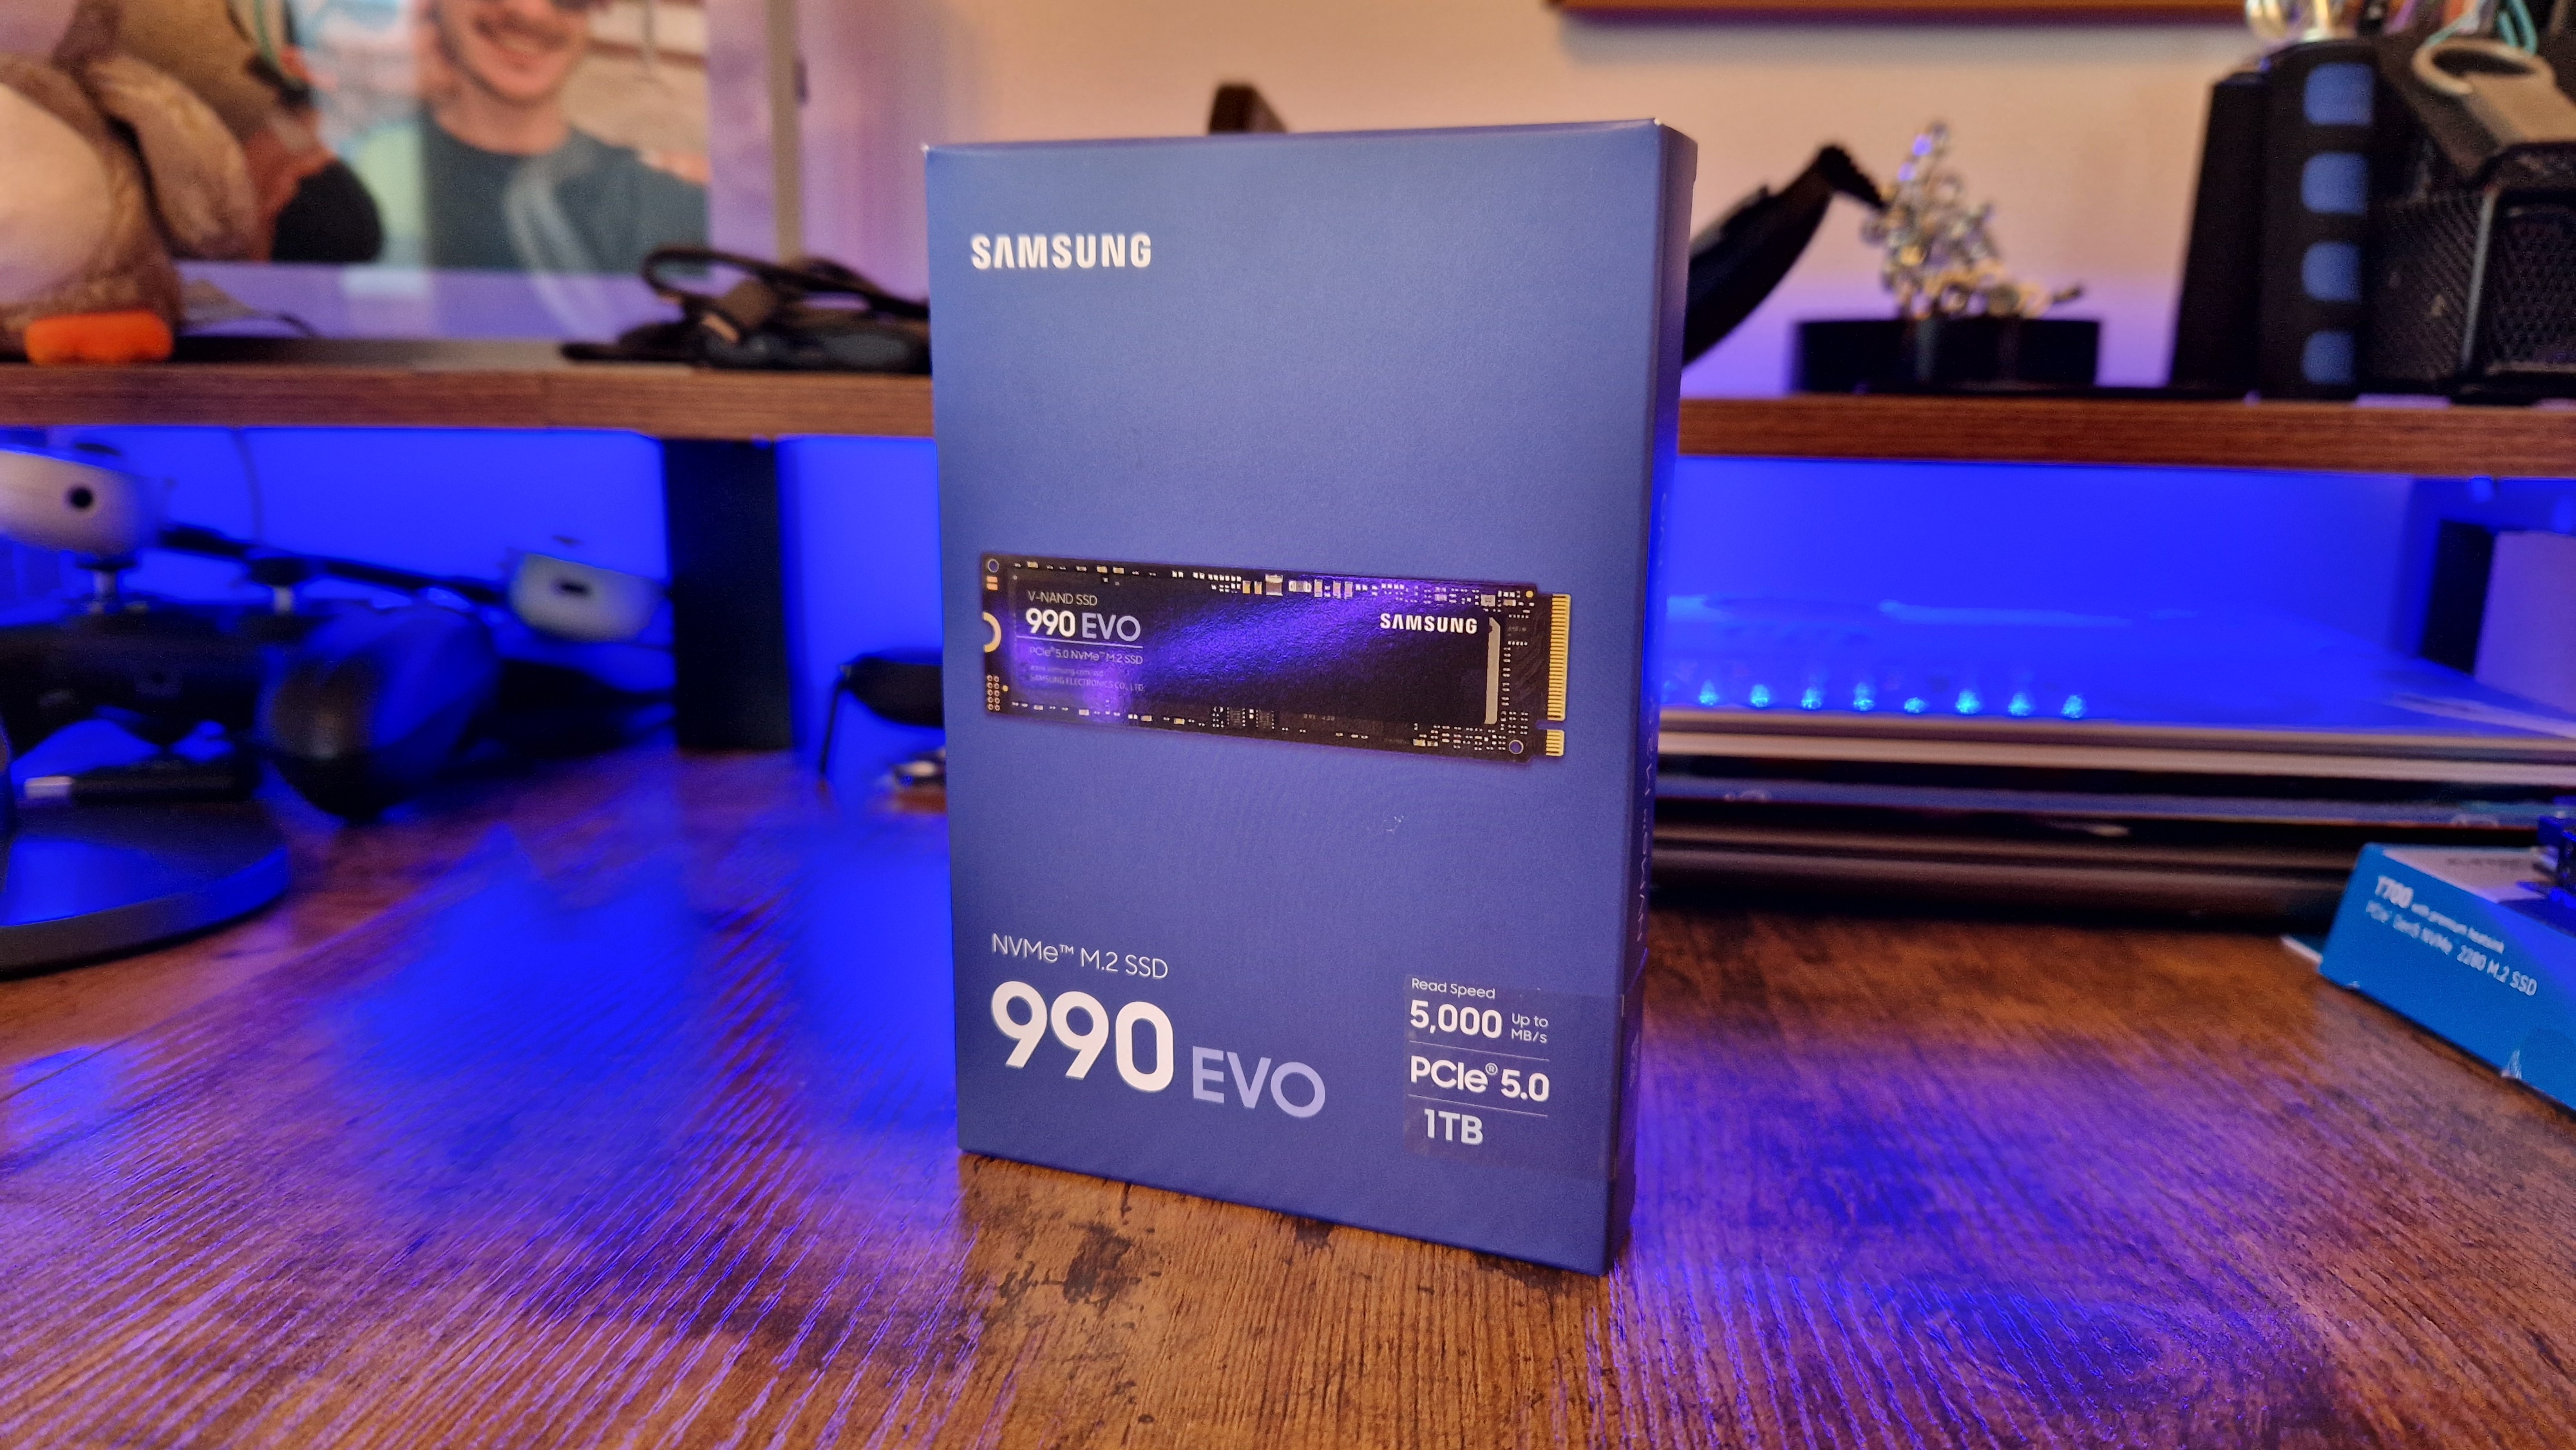 Samsung's first gen 5 SSD is slower than most PS5 SSDs, but that